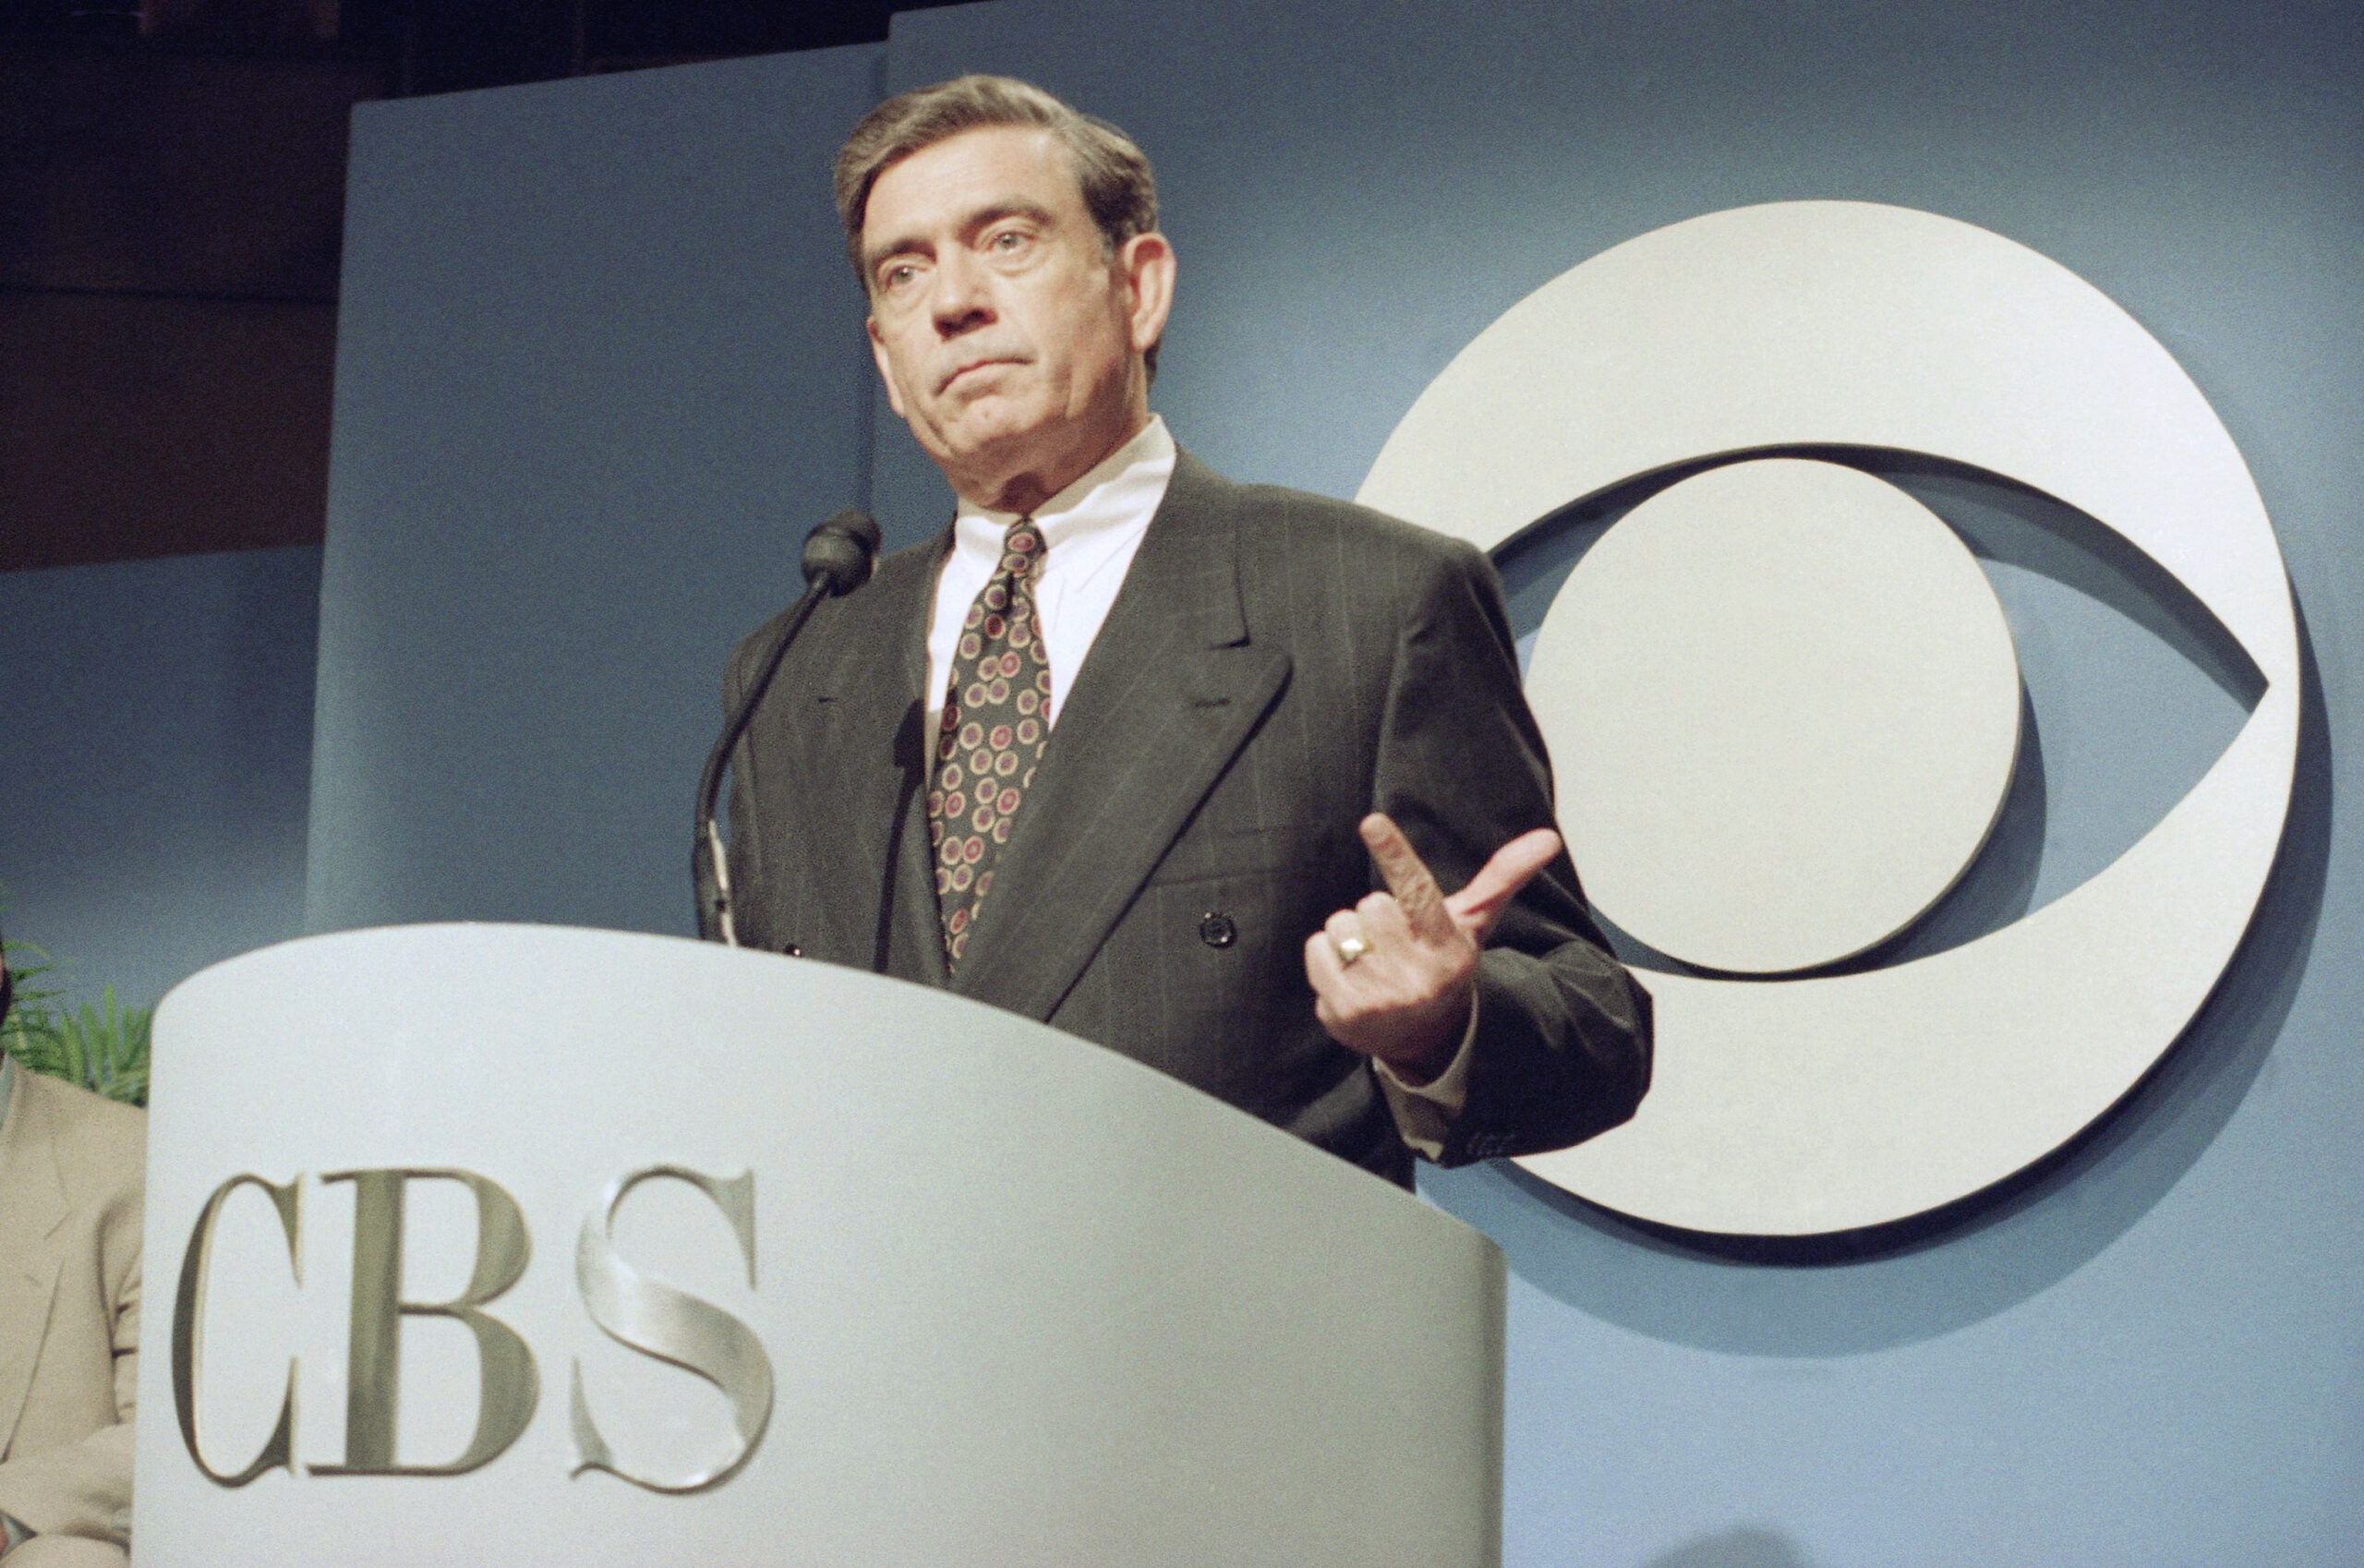 Dan Rather gestures during a news conference in New York